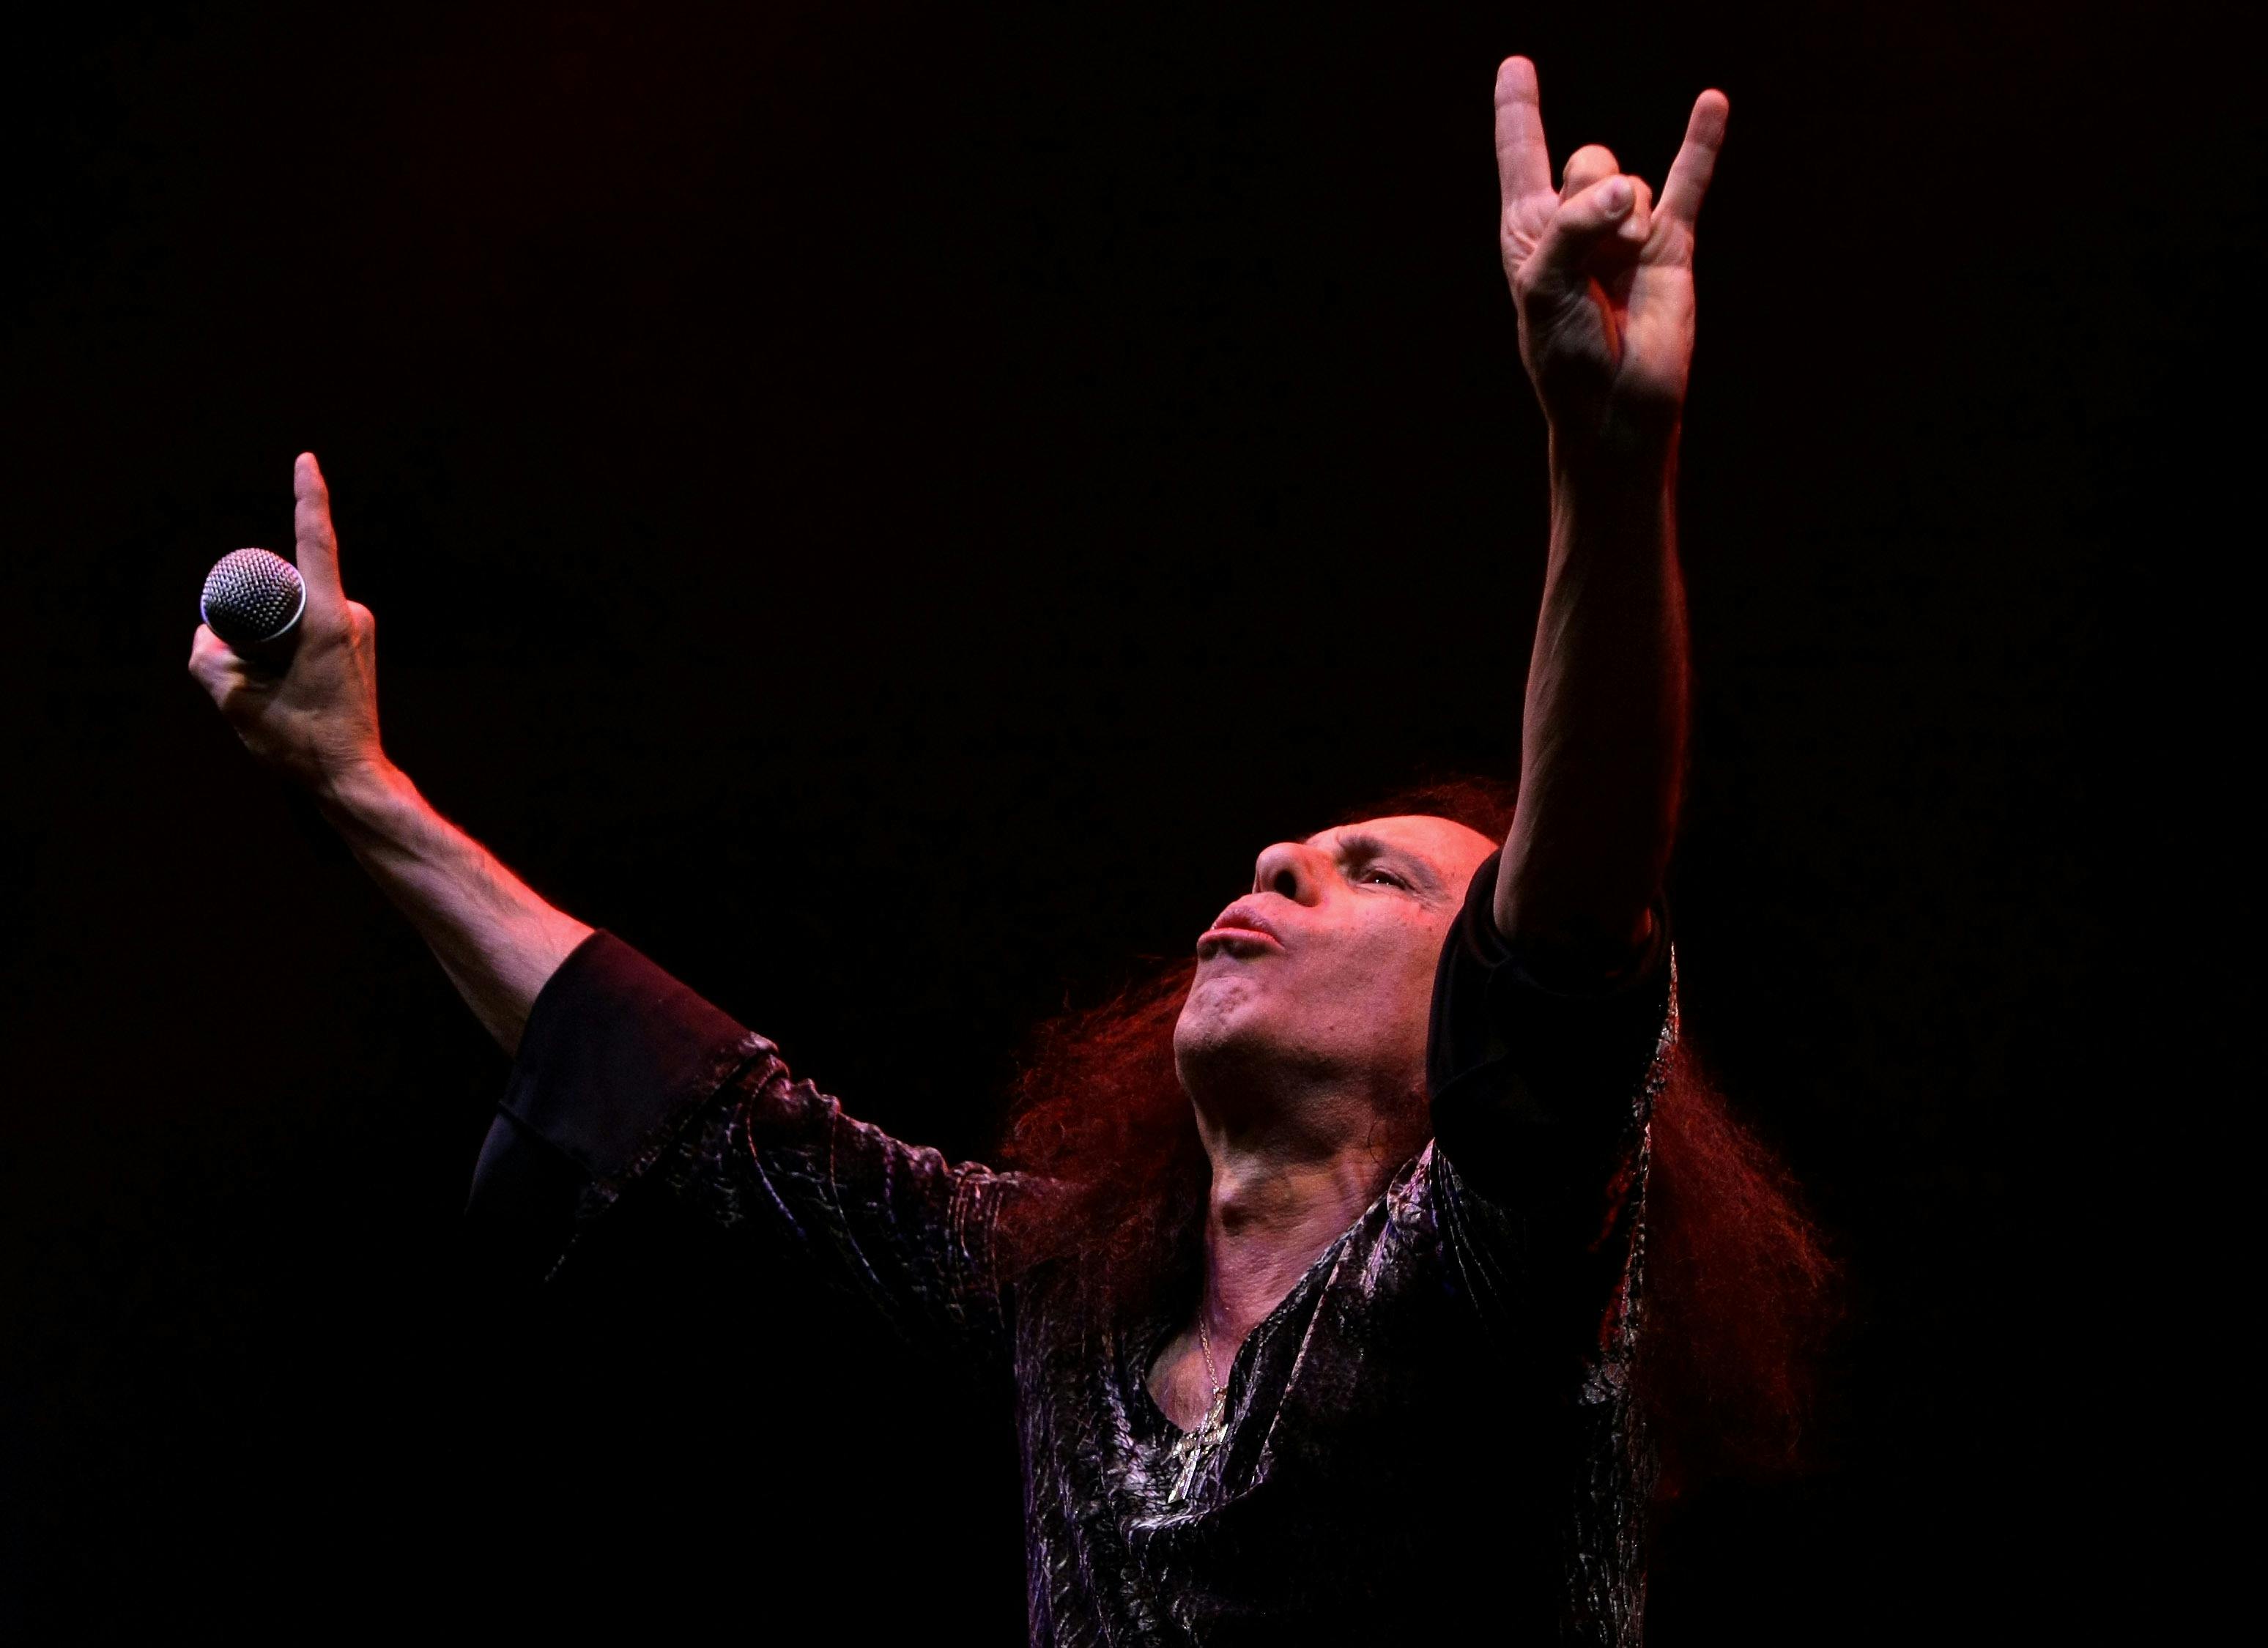 MELBOURNE, AUSTRALIA-AUGUST 10: Ronnie James Dio performs on stage with Heaven and Hell during their Heaven and Hell 2007 tour at Rod Laver Arena on August 10, 2007 in Melbourne, Australia. Heaven and Hell is a musical collaboration featuring Black Sabbath members Tony Iommi and Geezer Butler along with former members Ronnie James Dio and Vinny Appice. (Photo by Robert Cianflone/Getty Images)